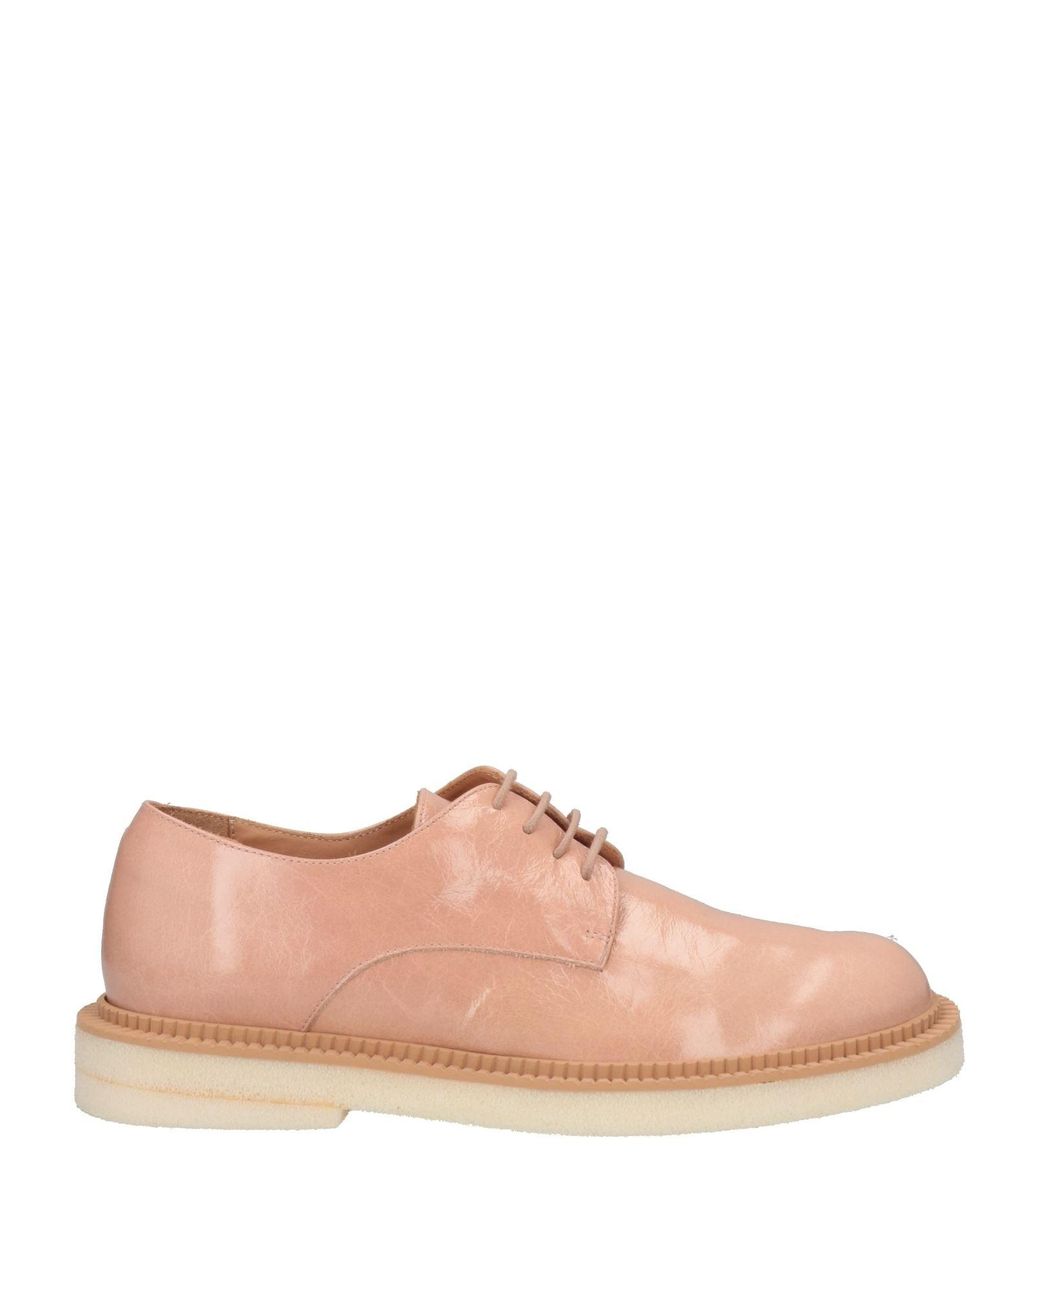 Paloma Barceló Lace-up Shoes in Pink | Lyst